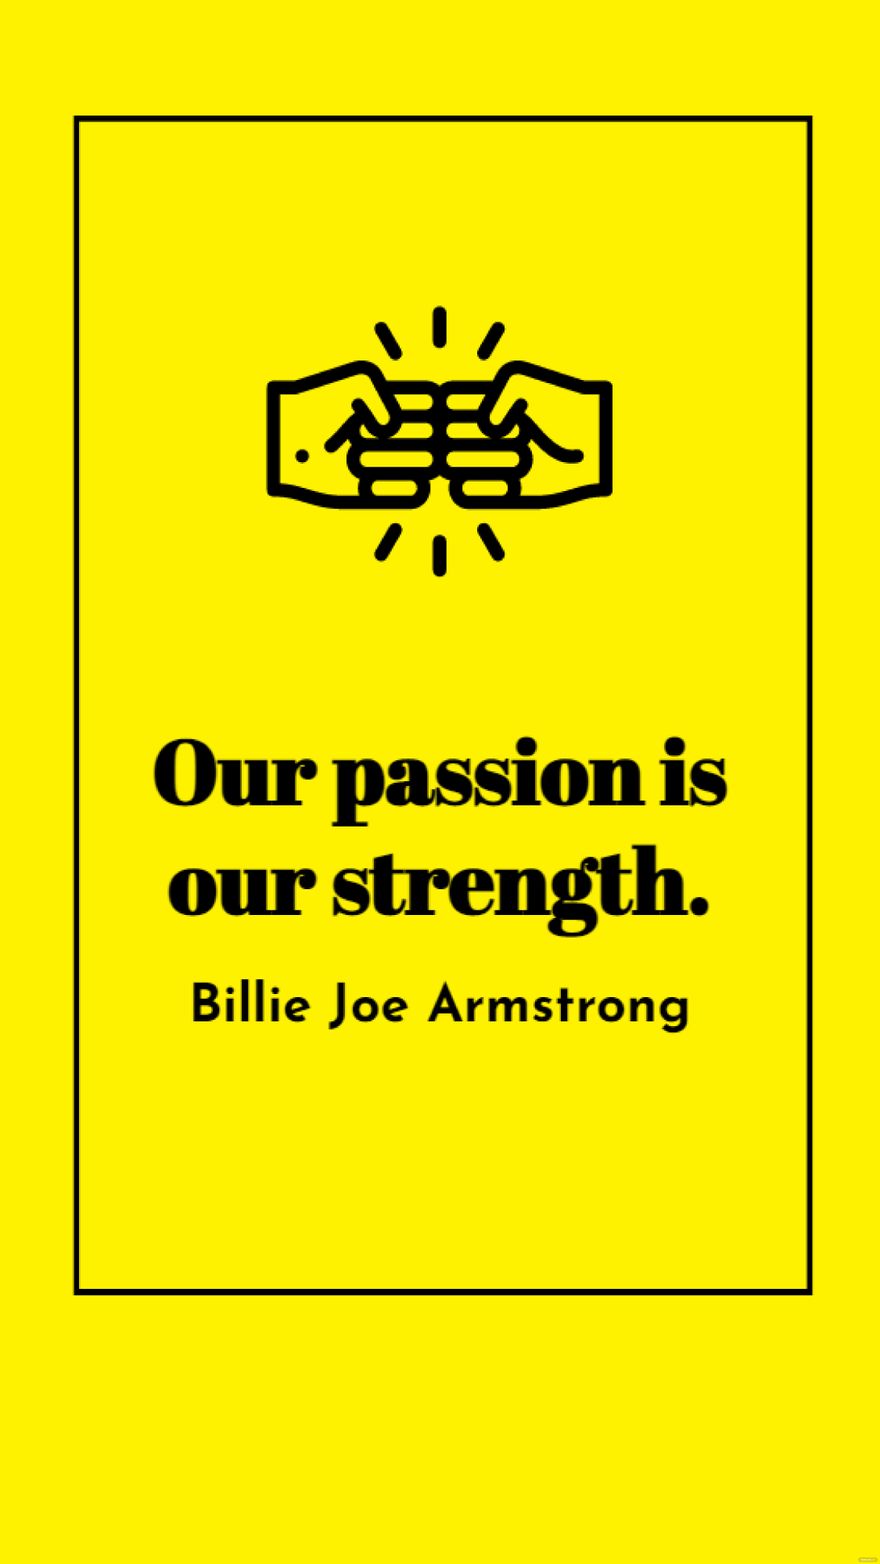 Billie Joe Armstrong - Our passion is our strength.